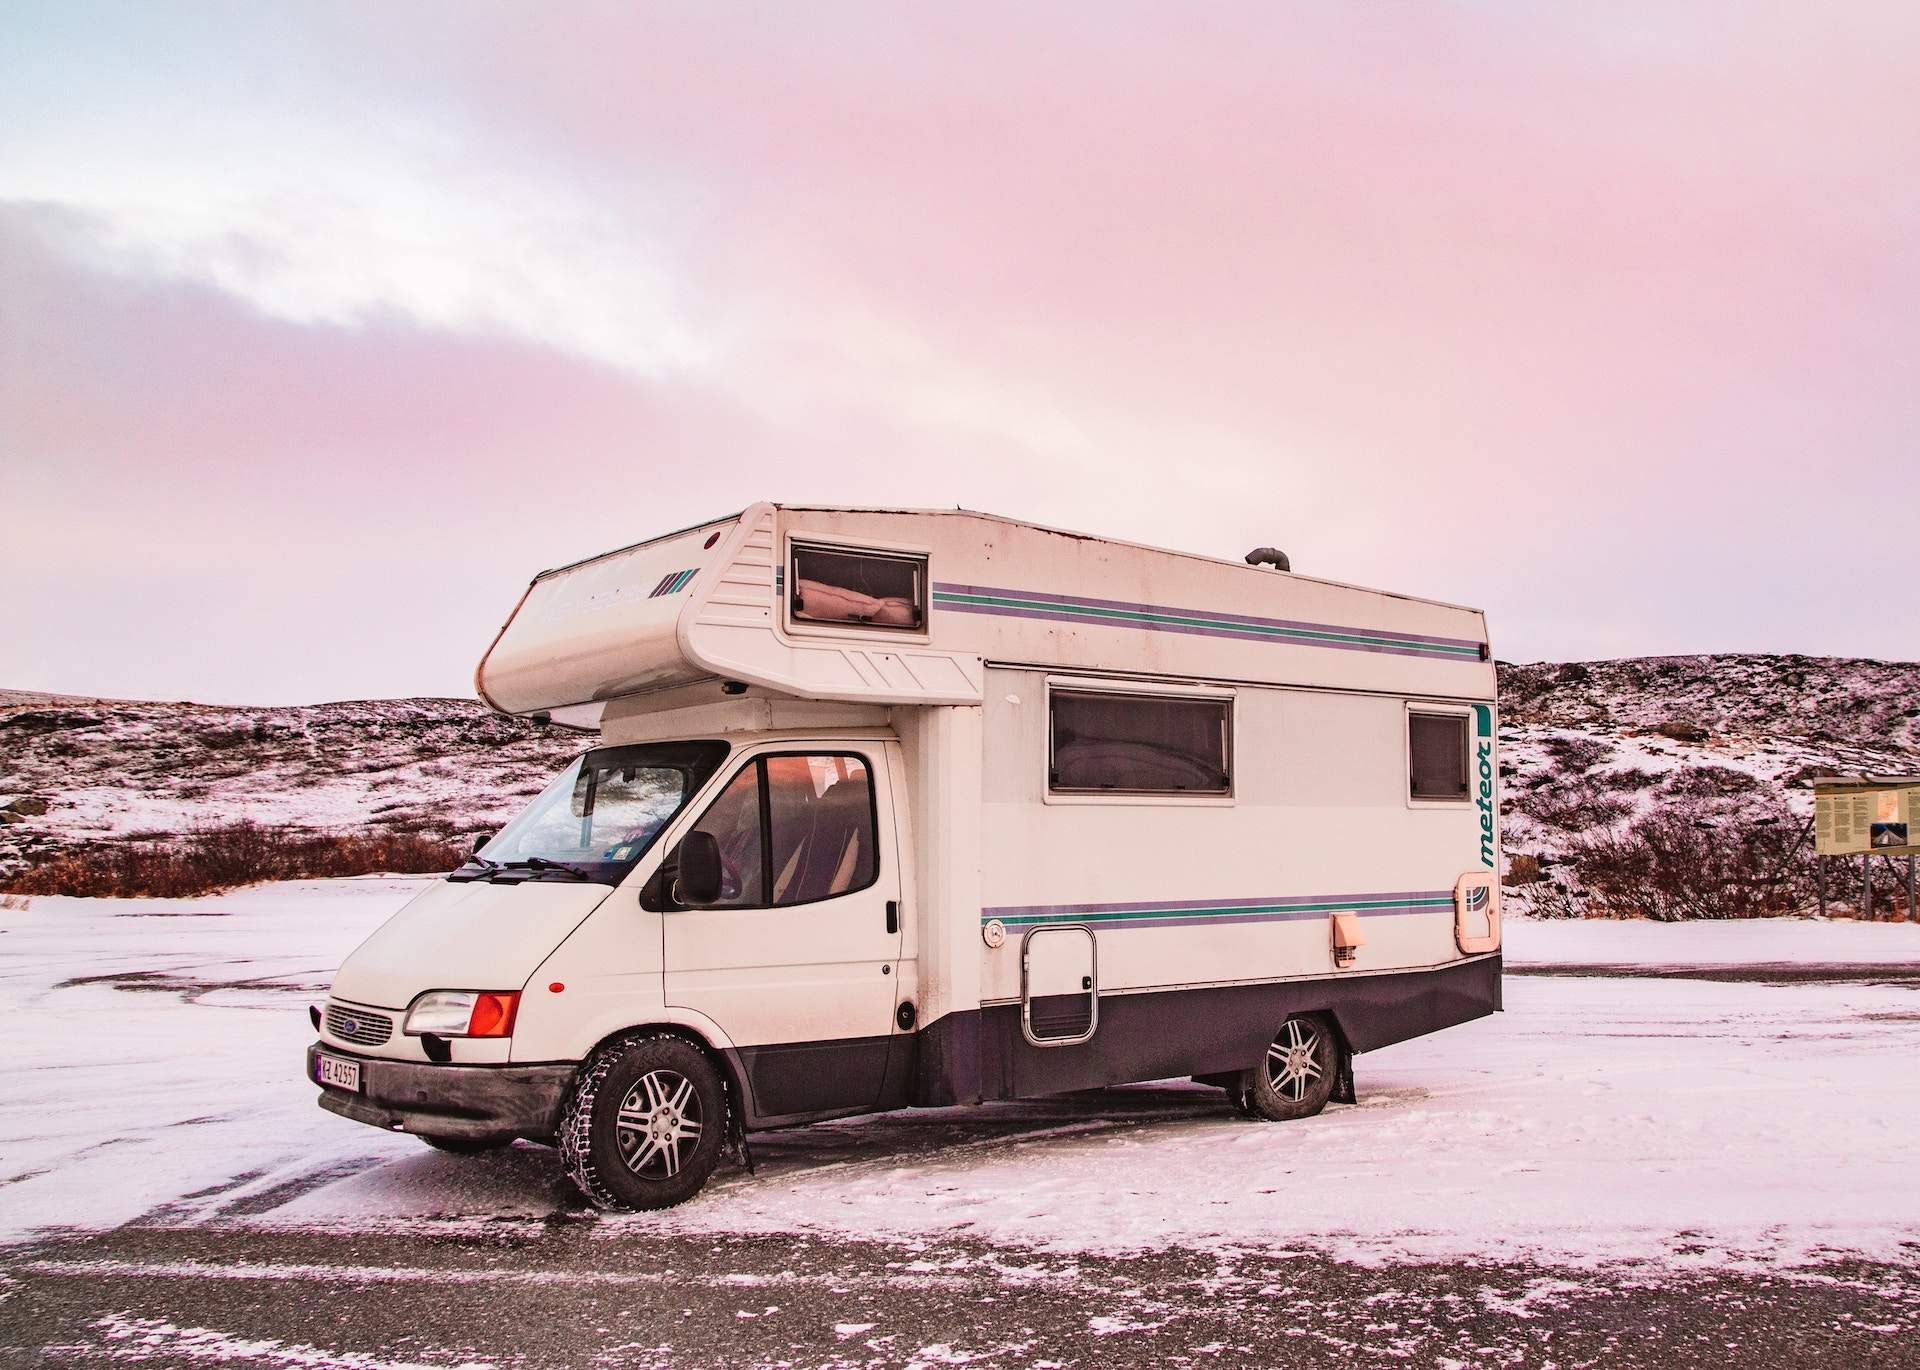 The Best Destinations for Winter RVing